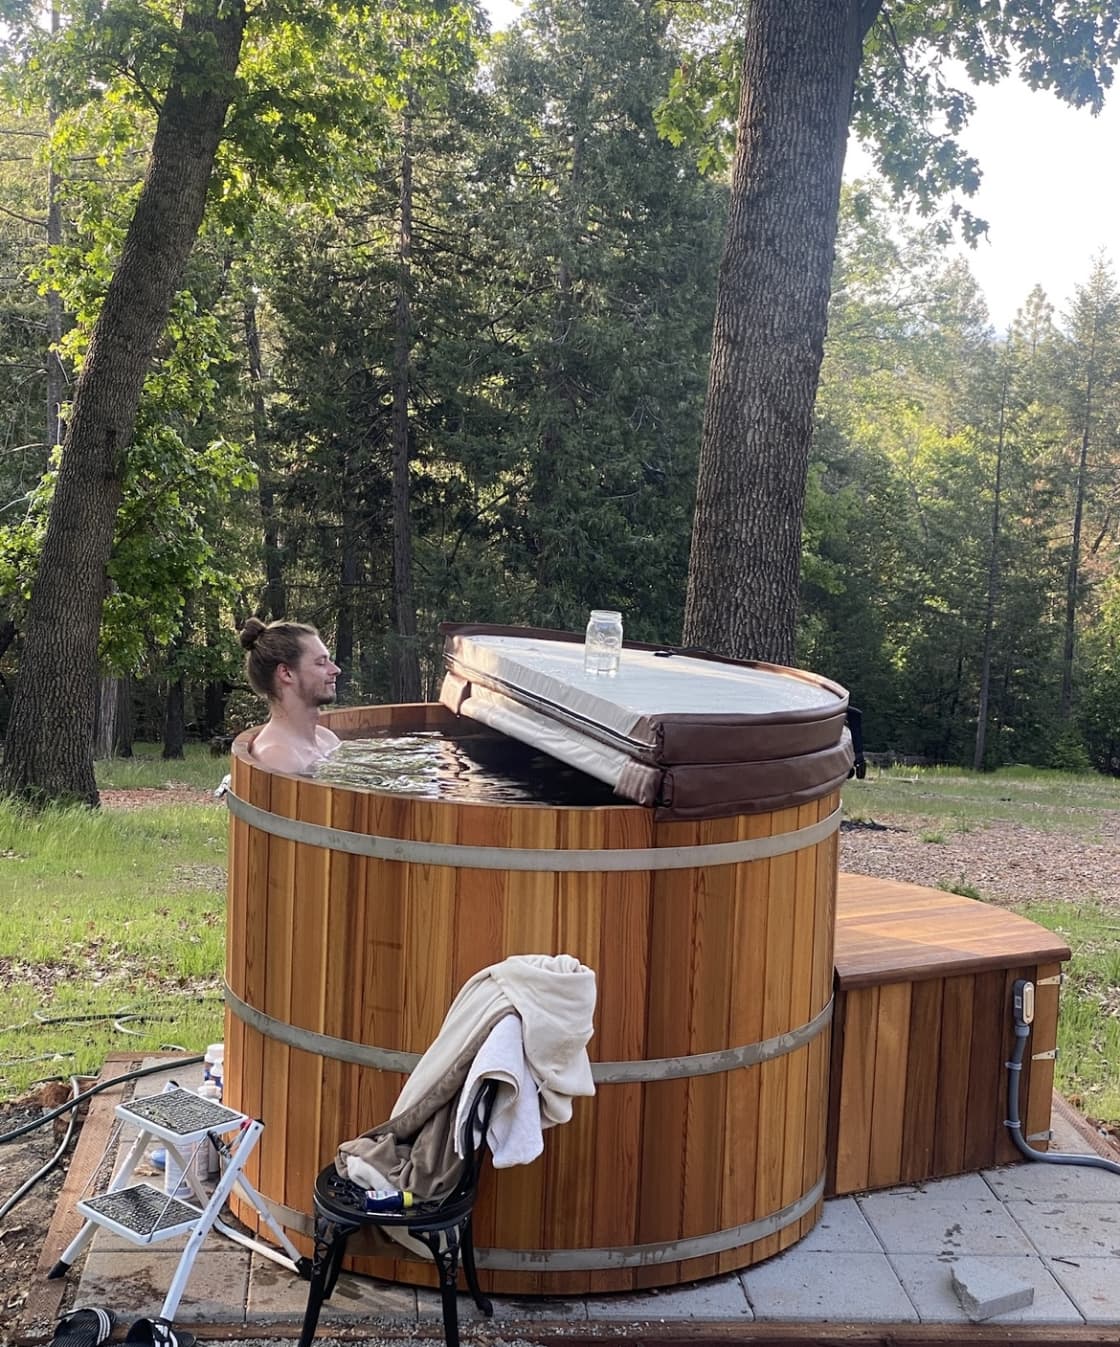 Starry Hot Tub/Cold Plunge Glamping